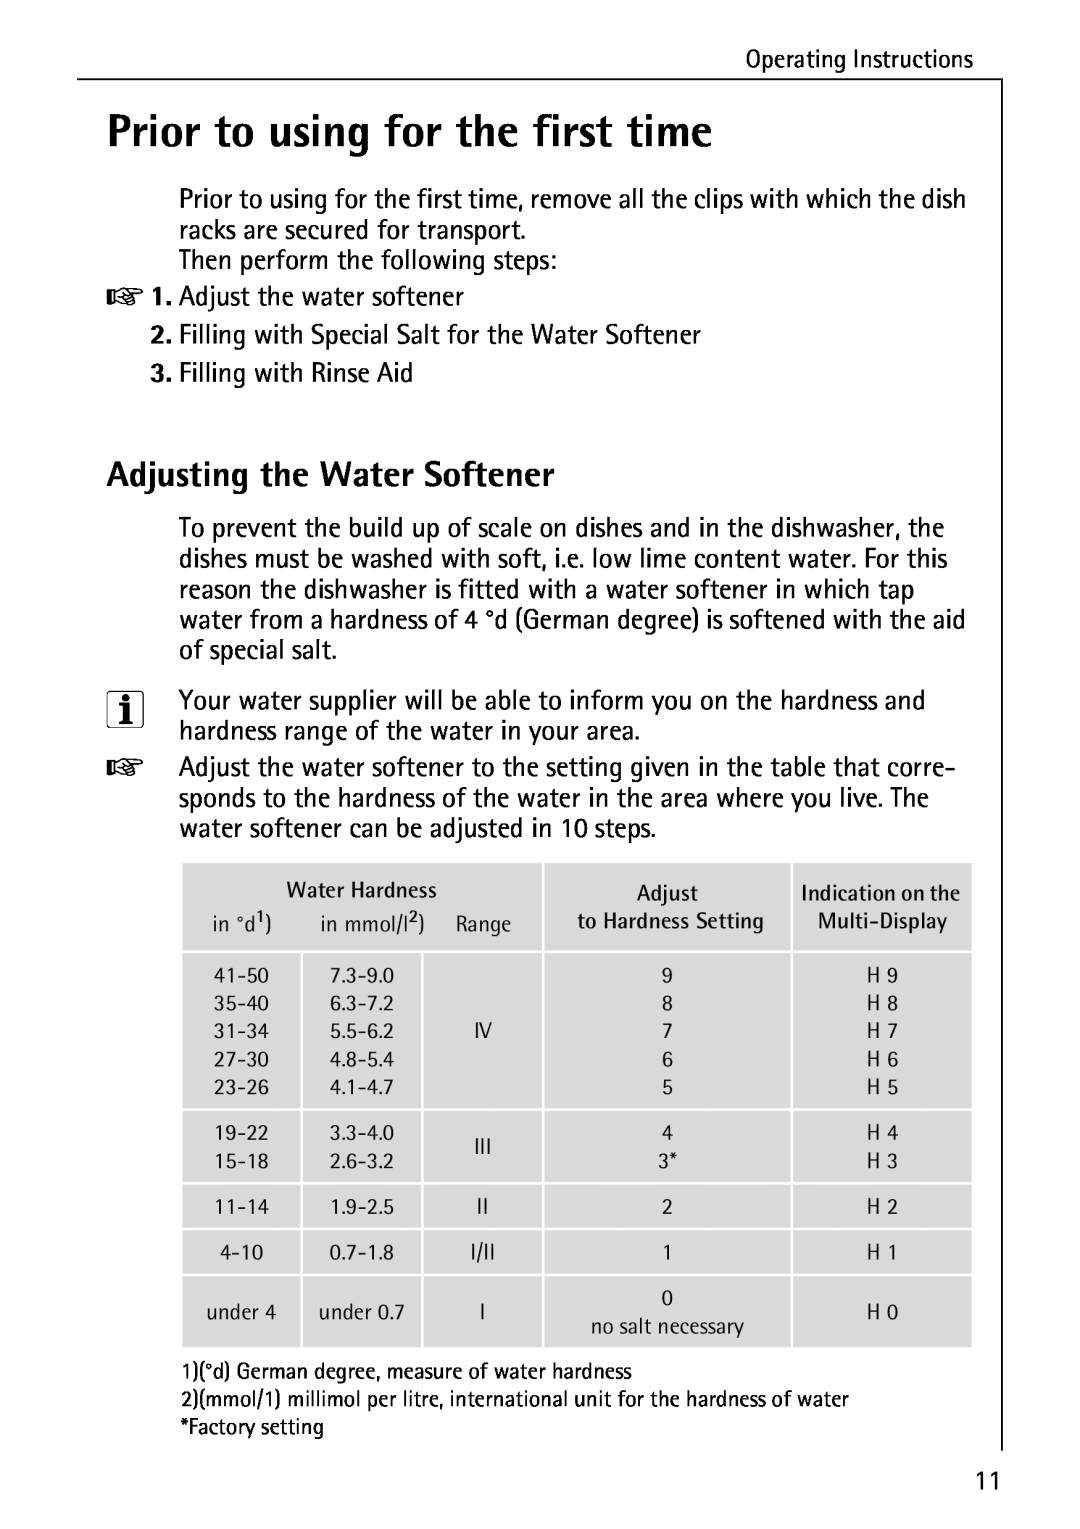 AEG 80850 I manual Prior to using for the first time, Adjusting the Water Softener 